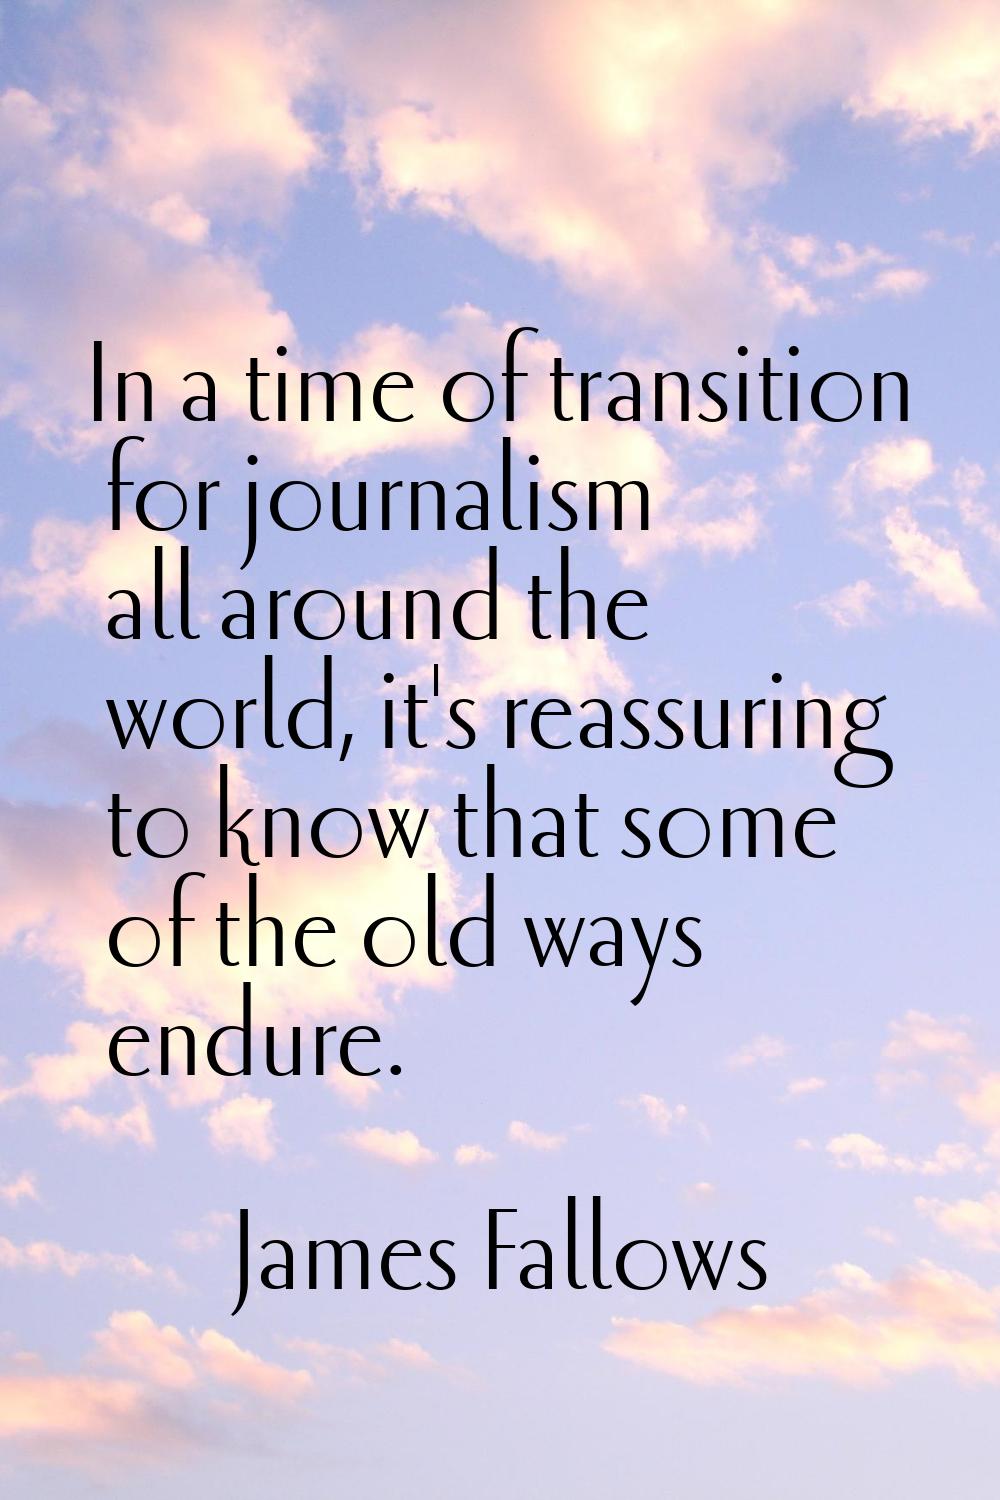 In a time of transition for journalism all around the world, it's reassuring to know that some of t